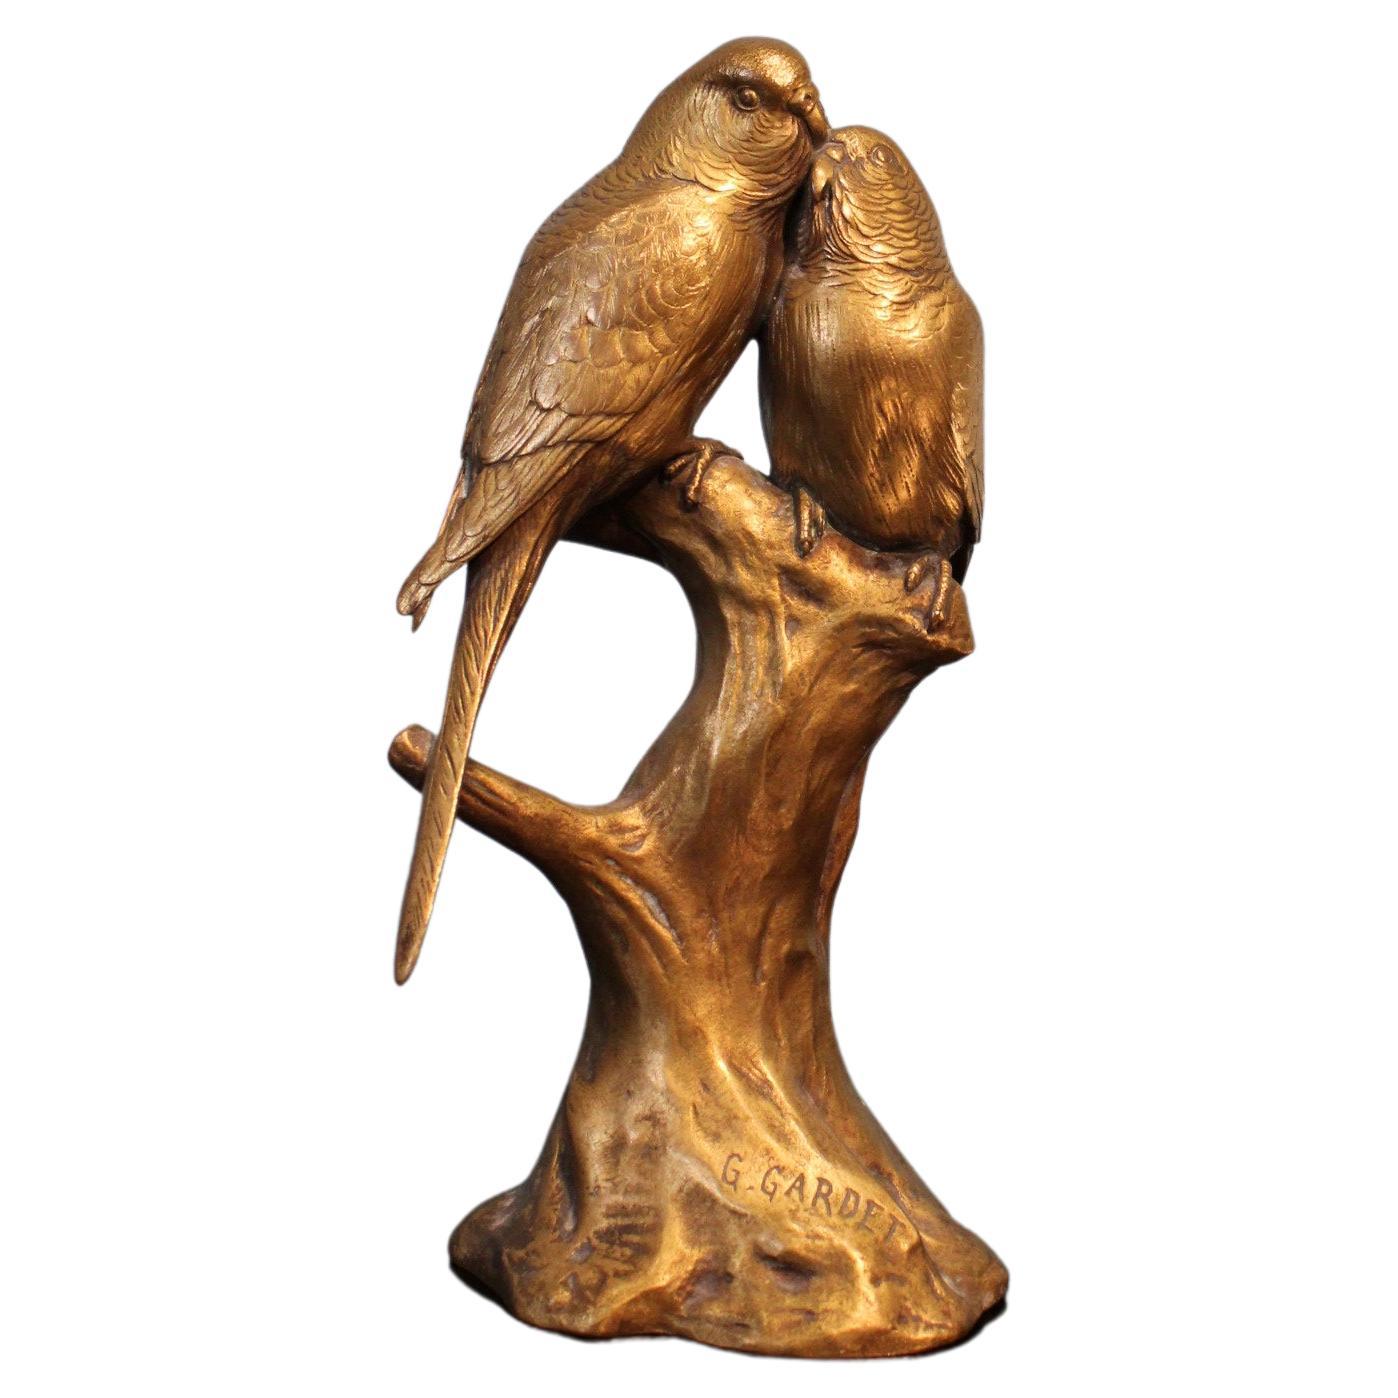 Two Inseparable Parakeets Bronze by Georges Gardet